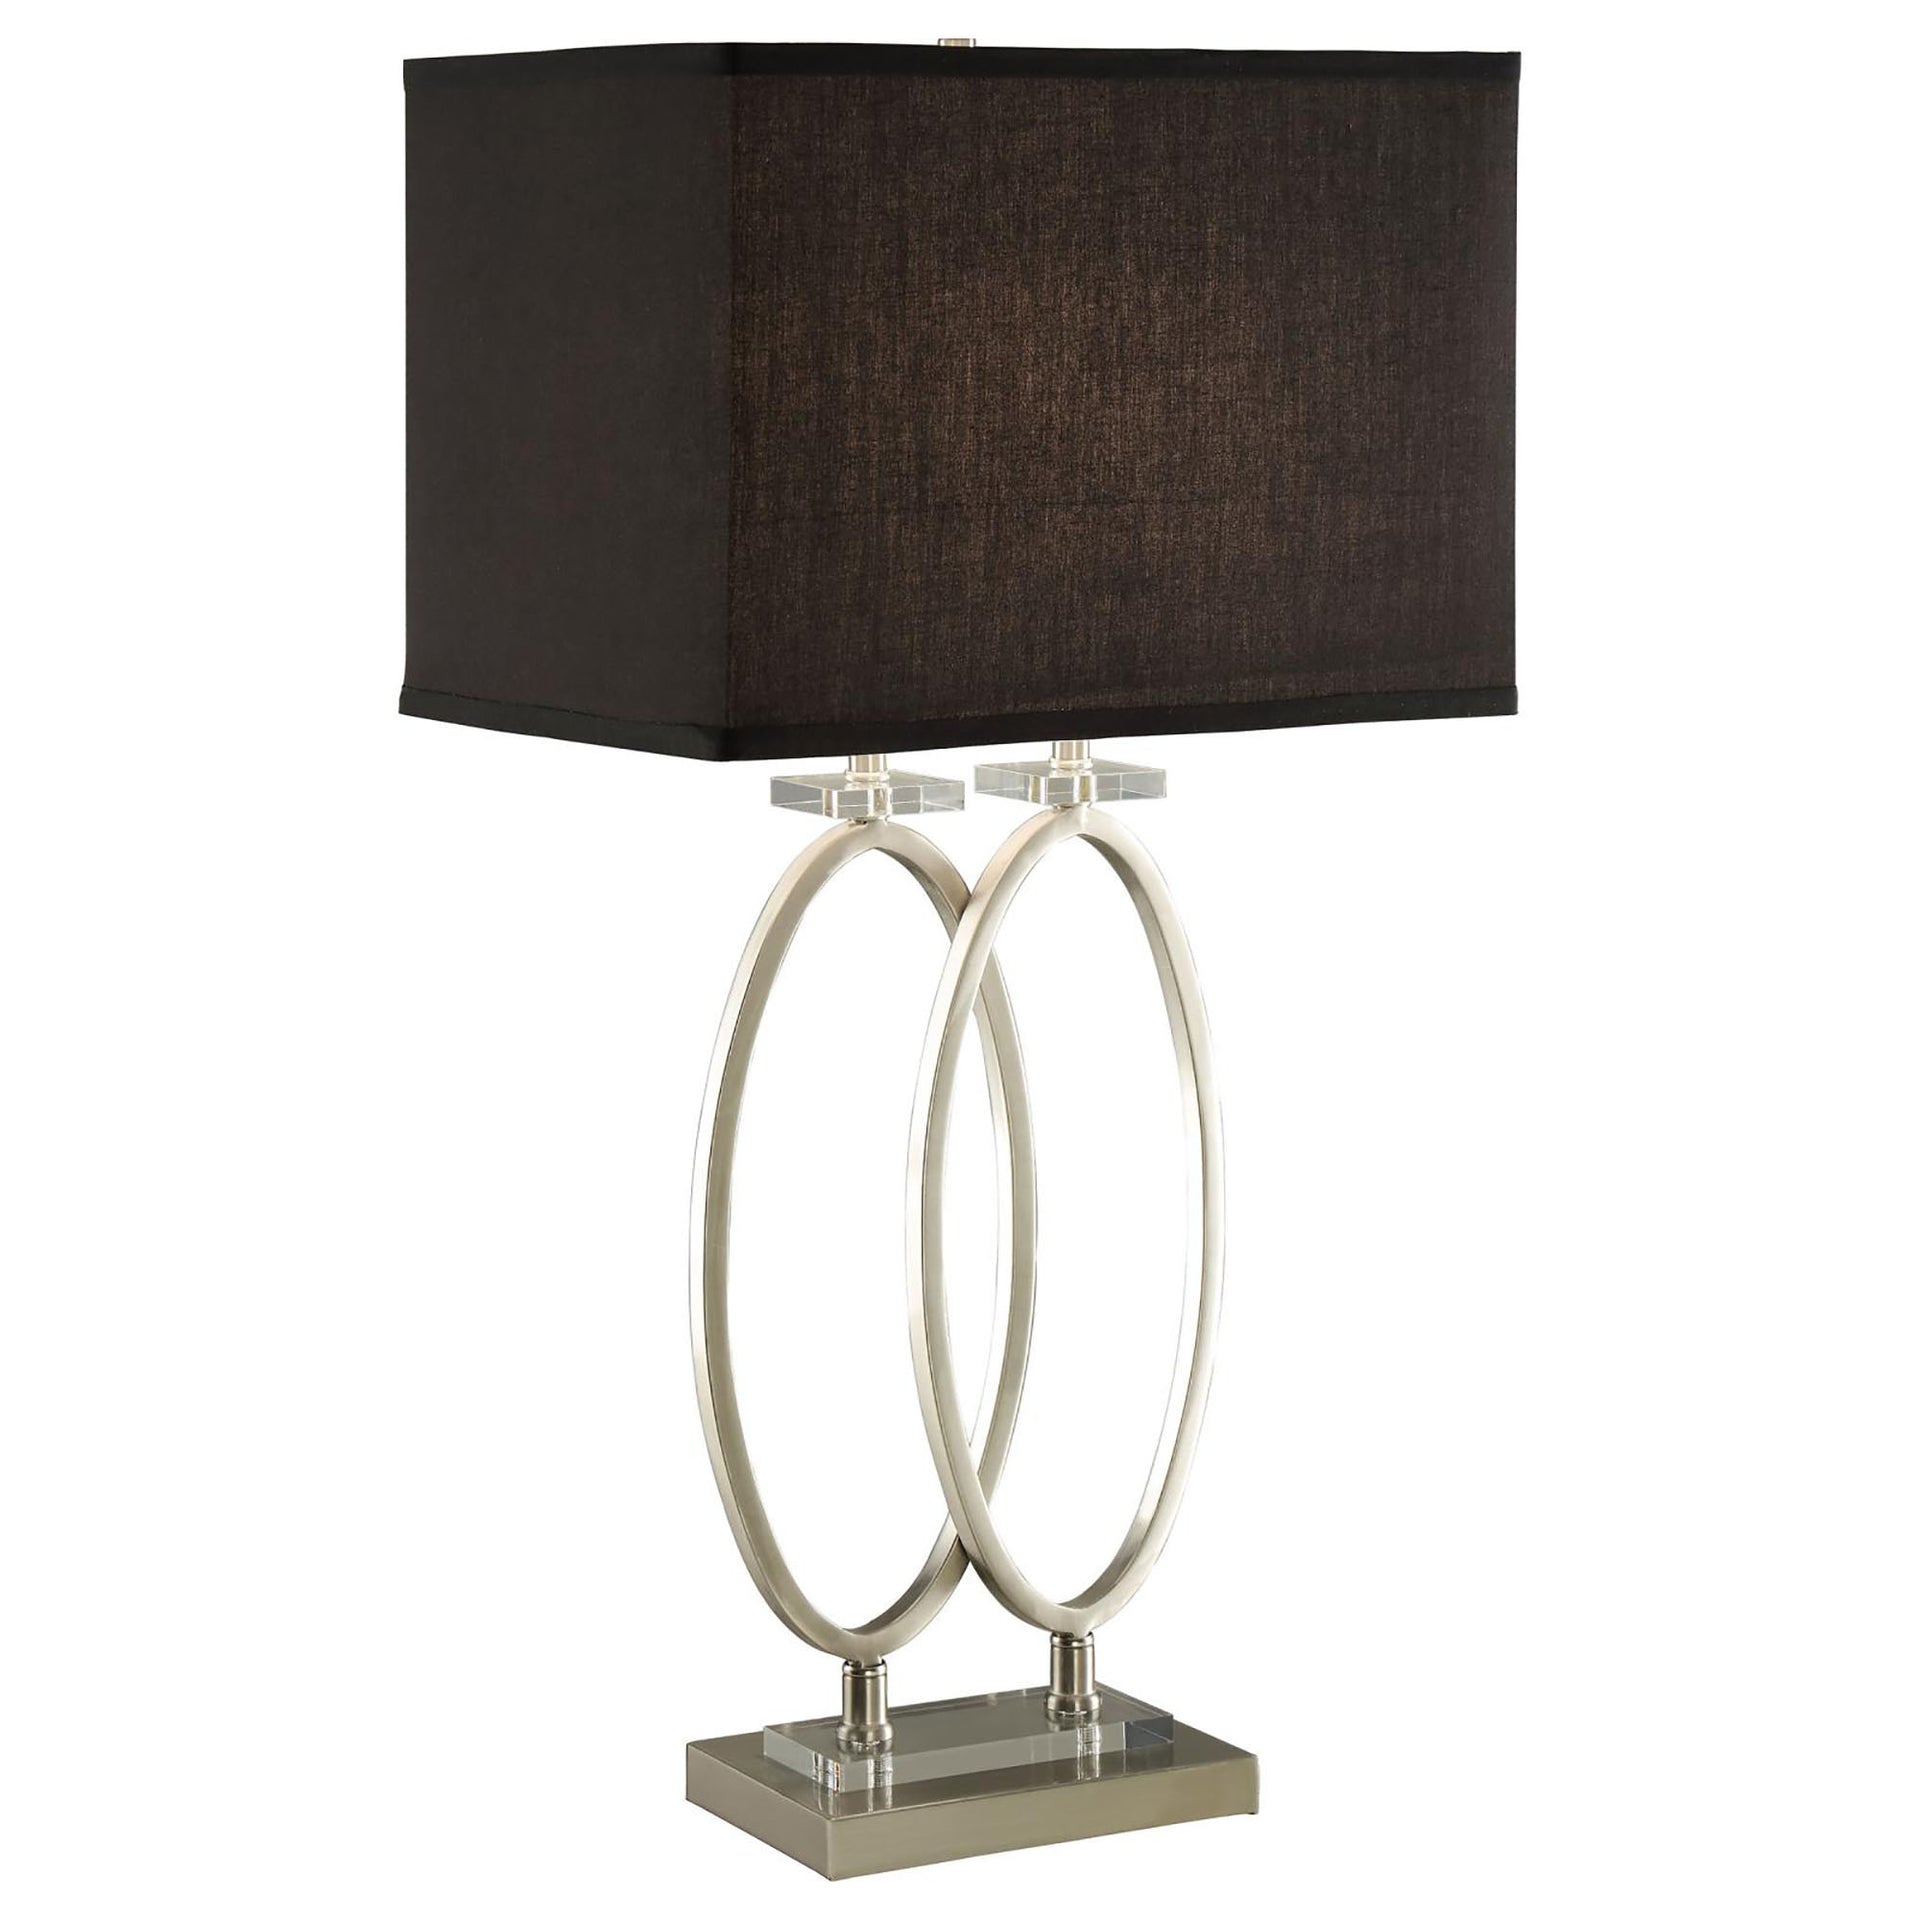 Brushed Nickel and Black Rectangular Shade Accent Lamp